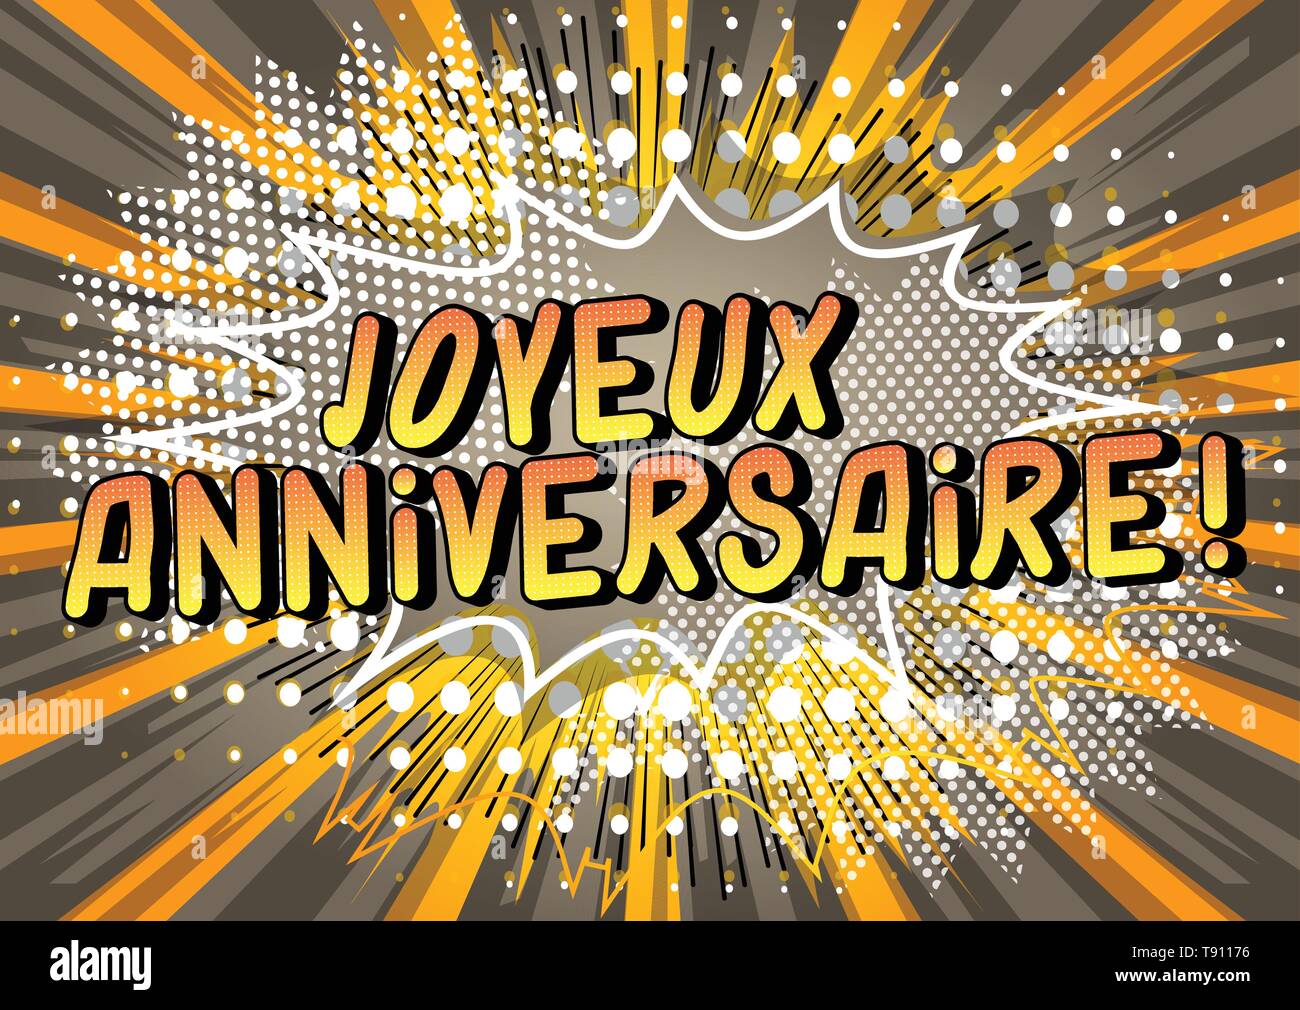 Joyeux Anniversaire High Resolution Stock Photography And Images Alamy